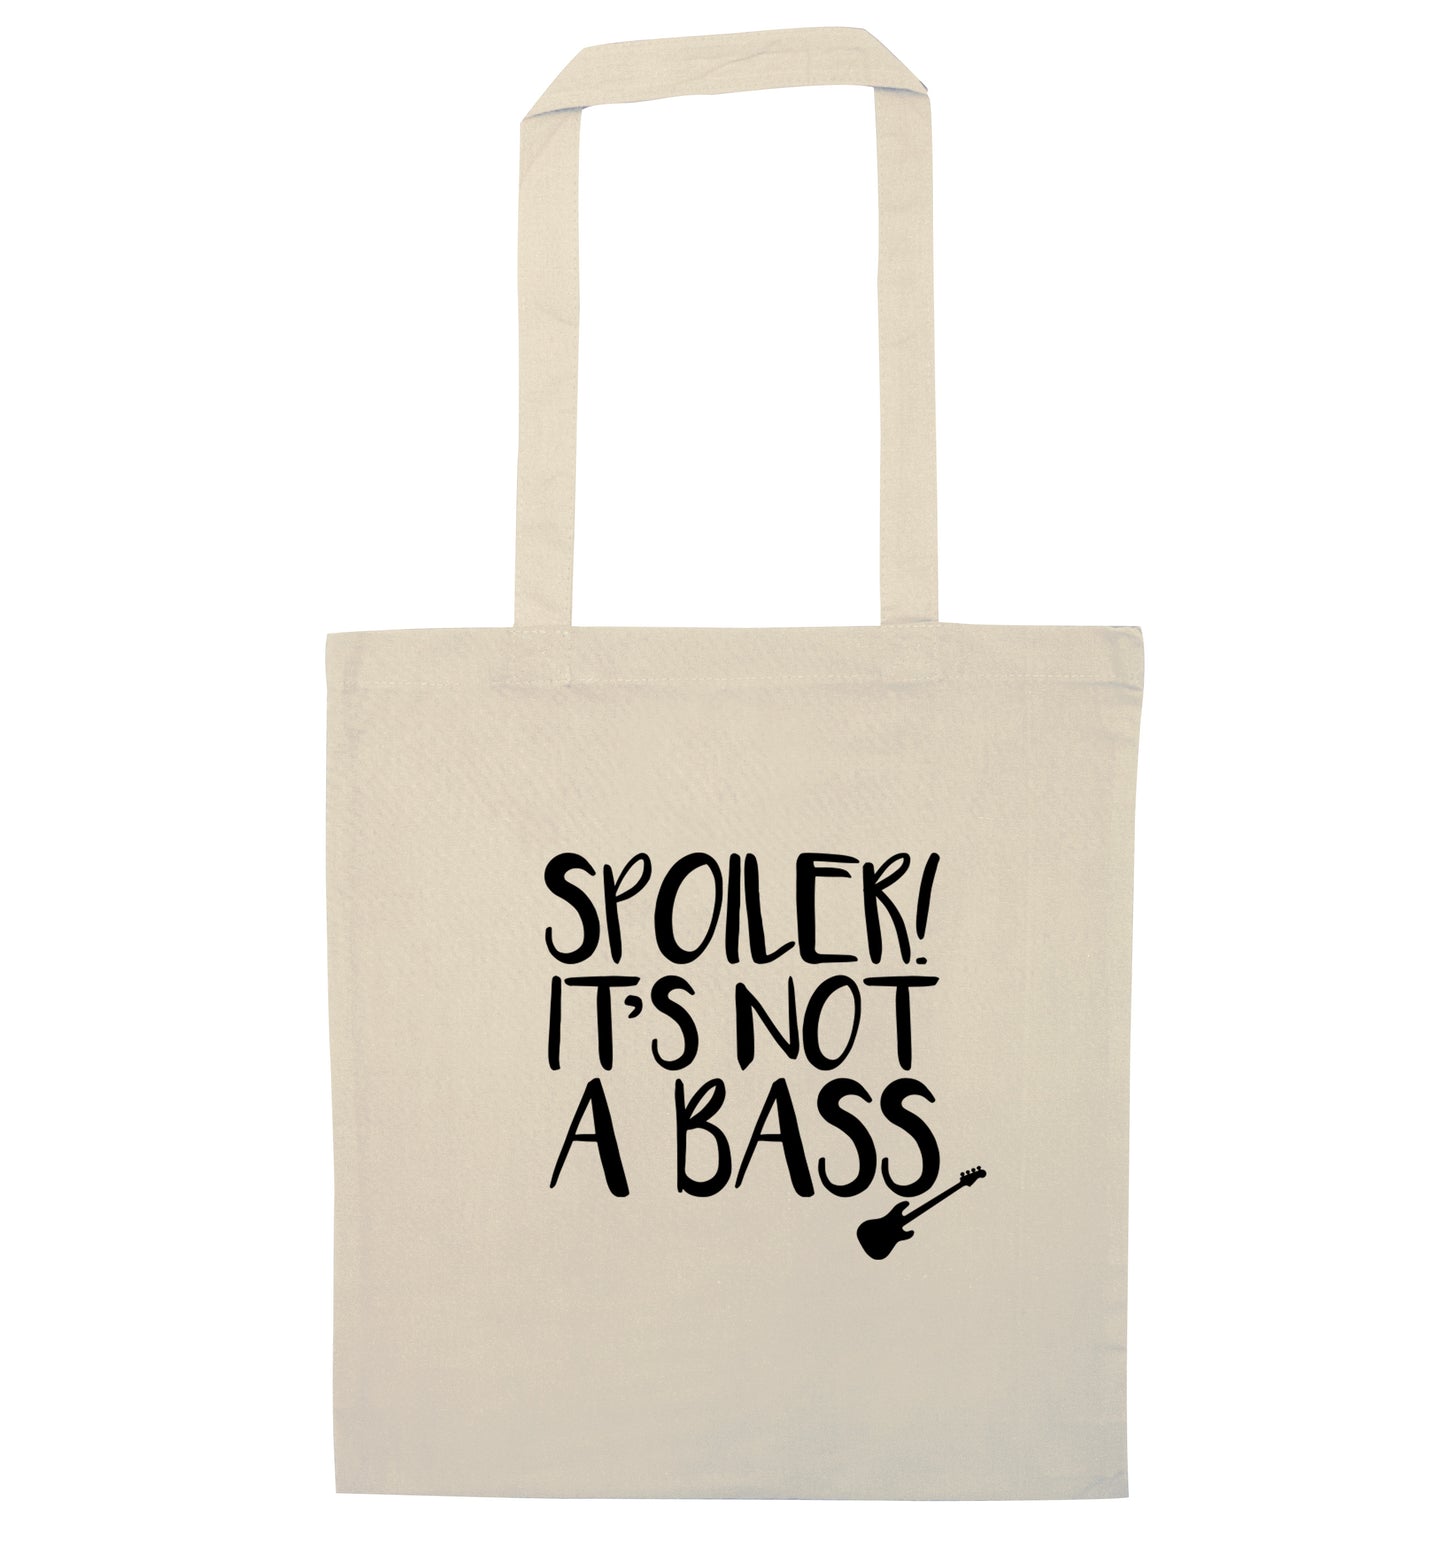 Spoiler it's not a bass natural tote bag